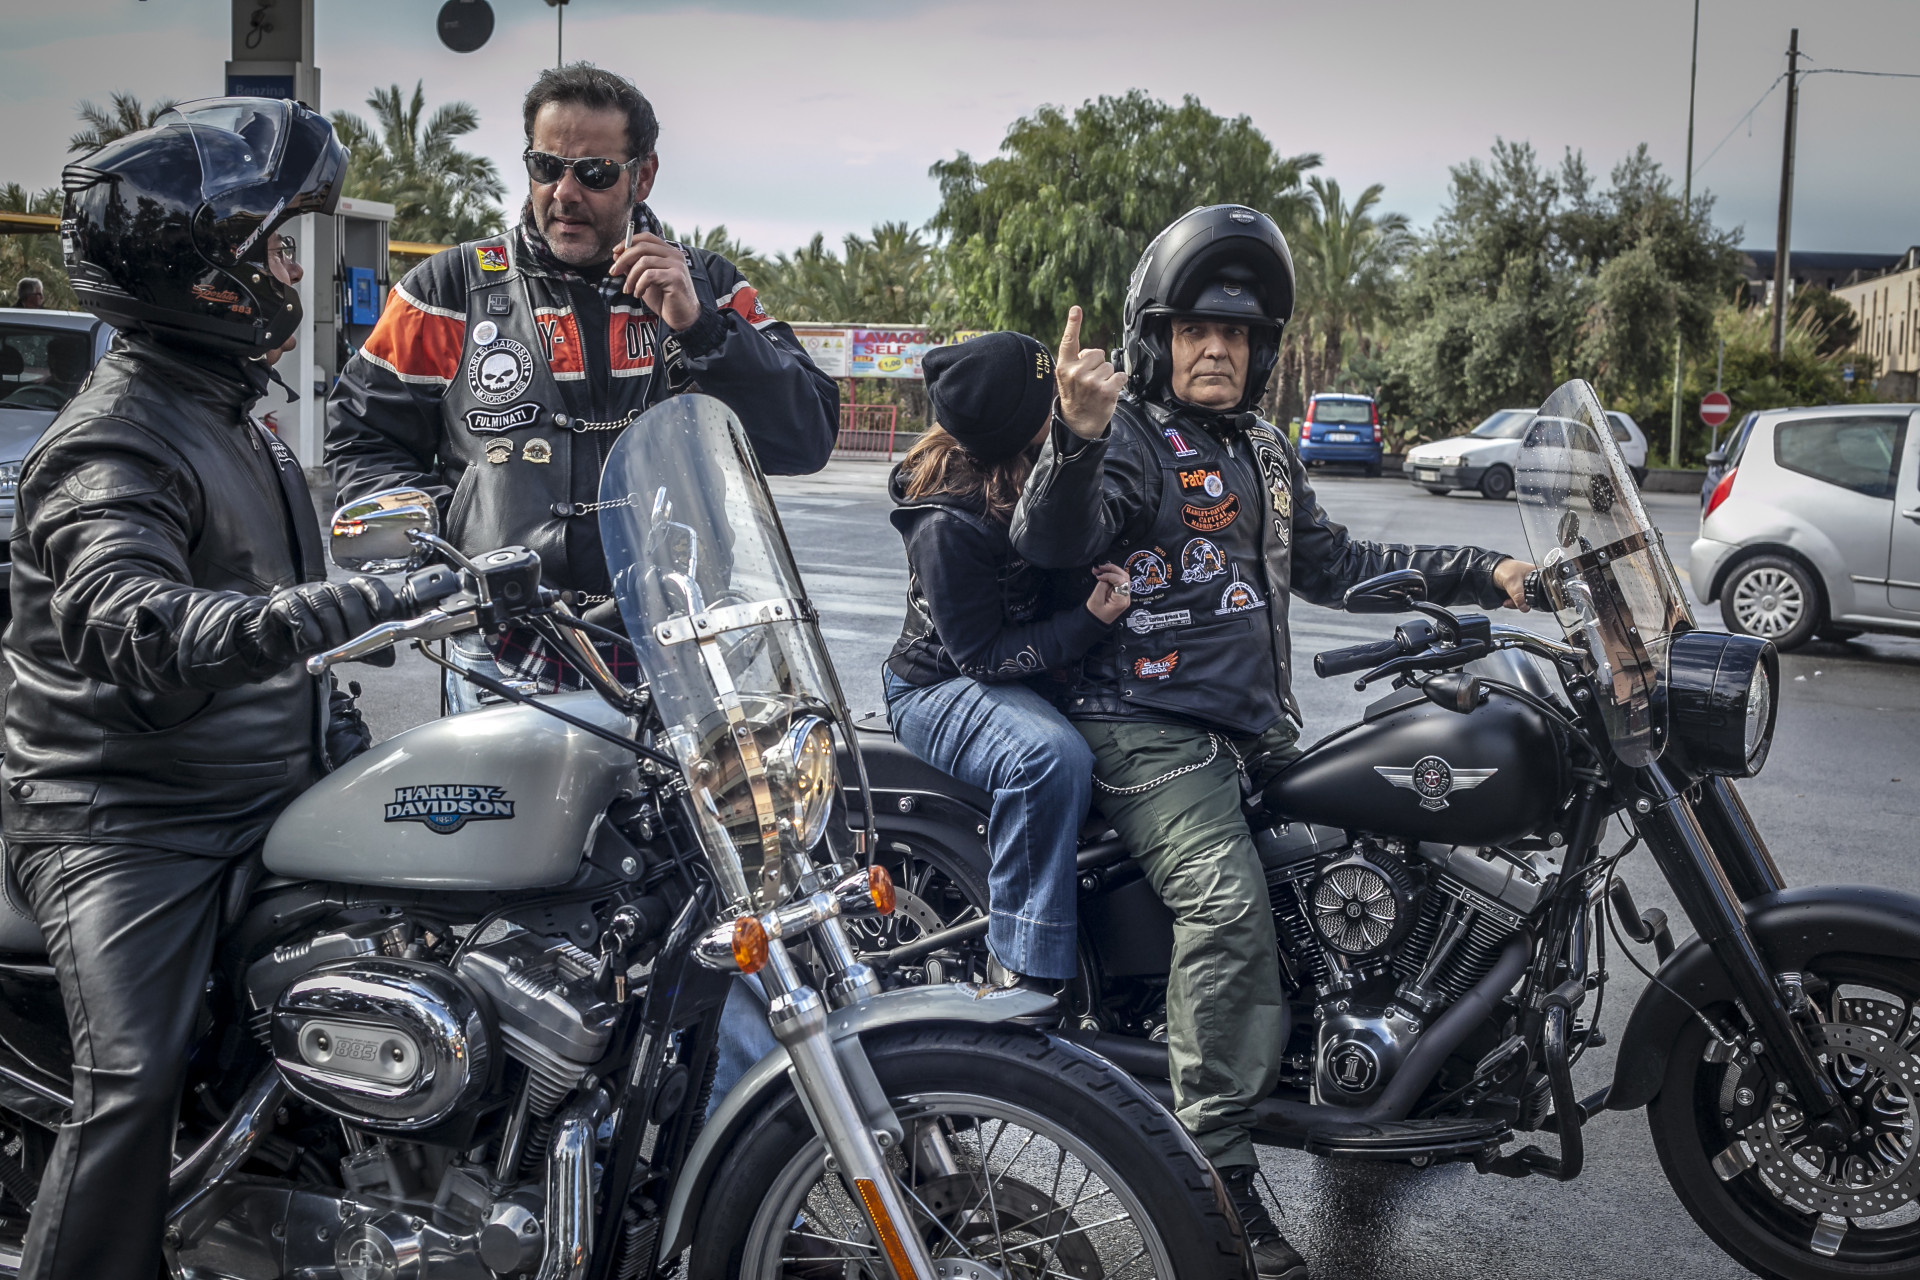 The Harley Owners Group, a club of Harley-Davidson owners and enthusiasts, has about one million members around the world.